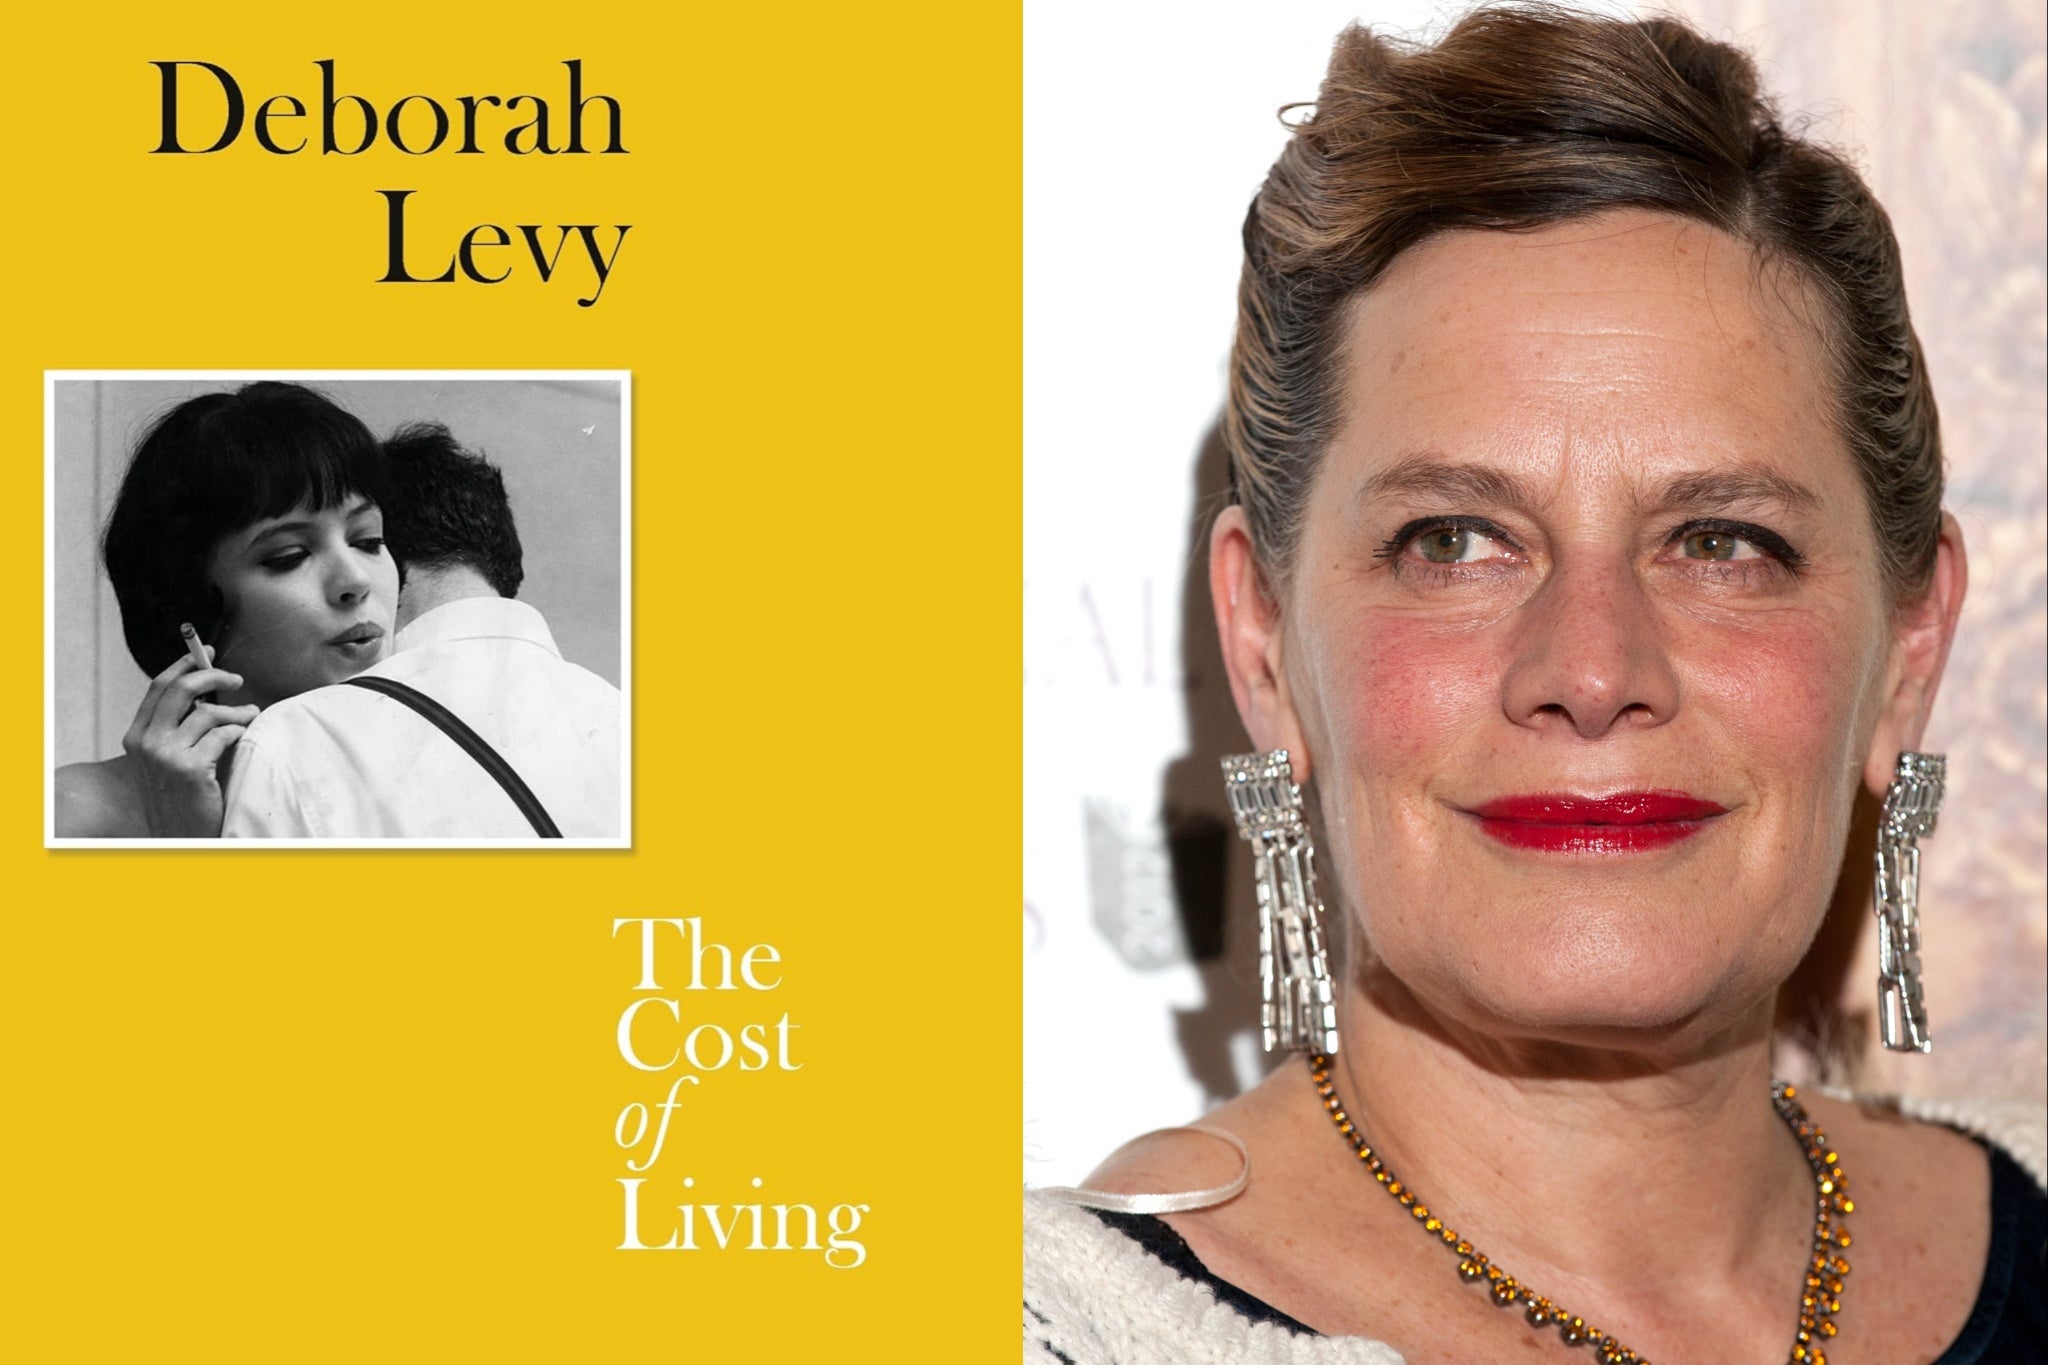 Deborah Levy and her book, ‘The Cost of Living'